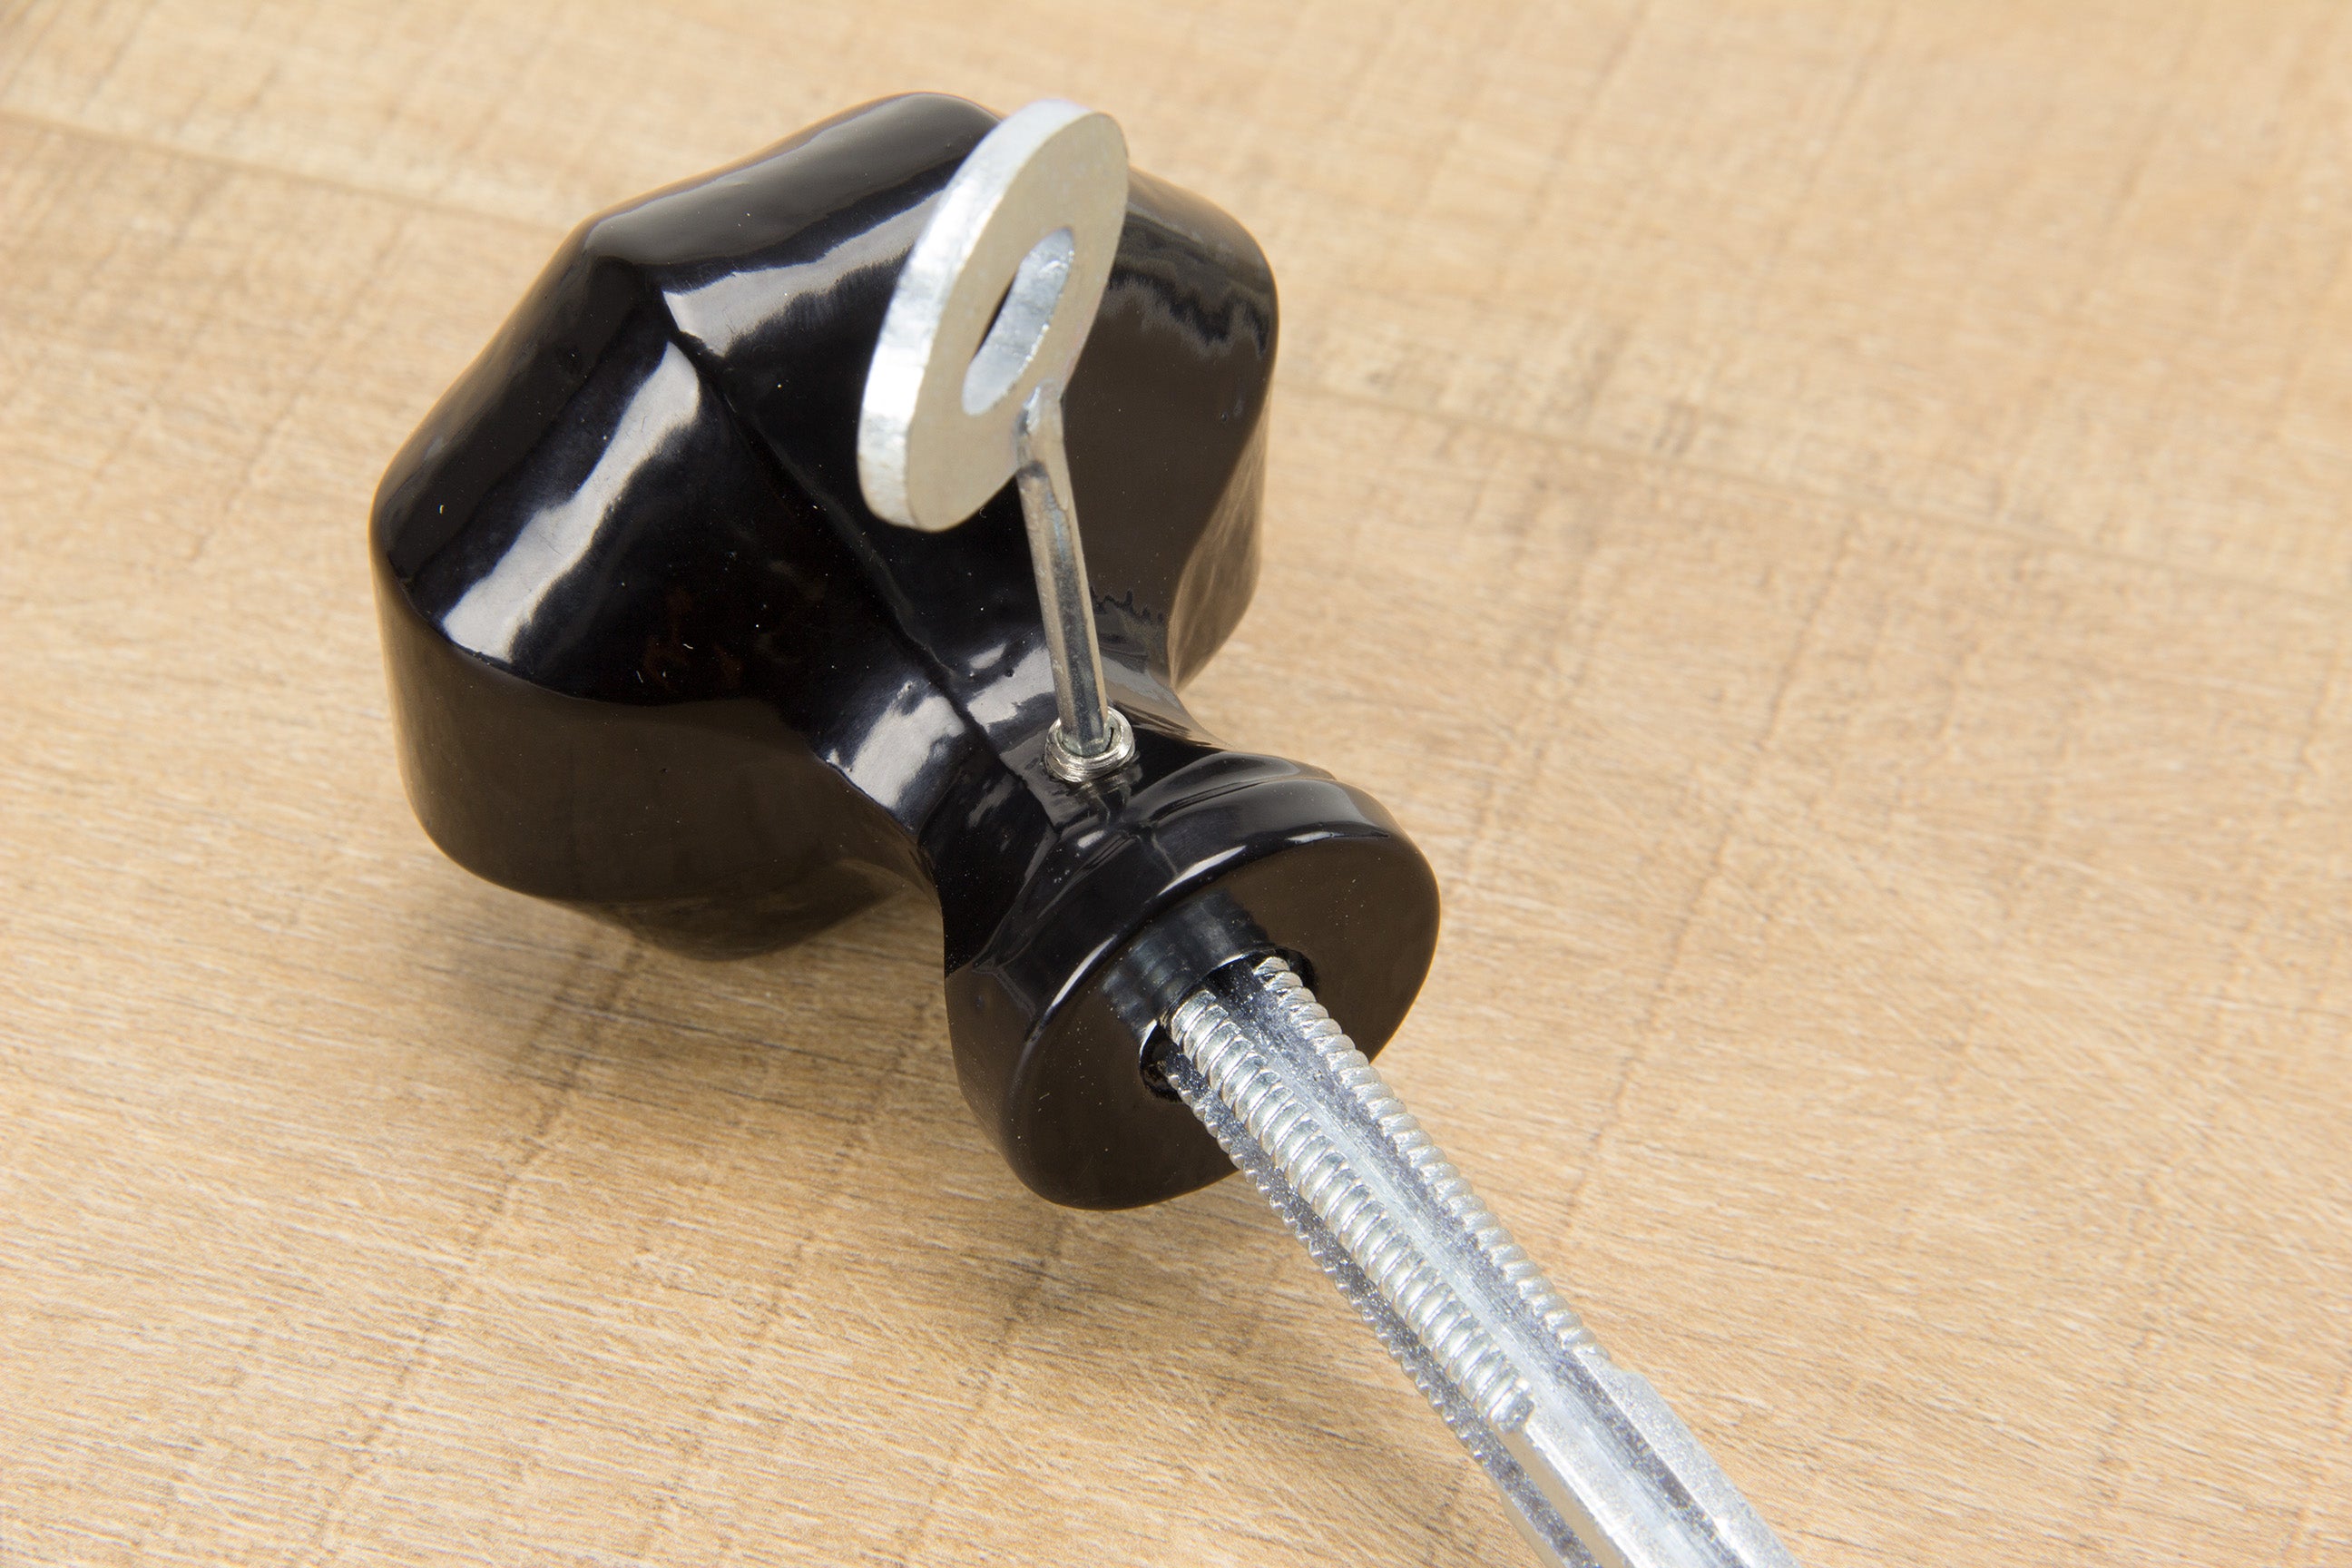 Person using an Allen key to tighten a grub screw on a Black Octagonal knob to secure it to the spindle.